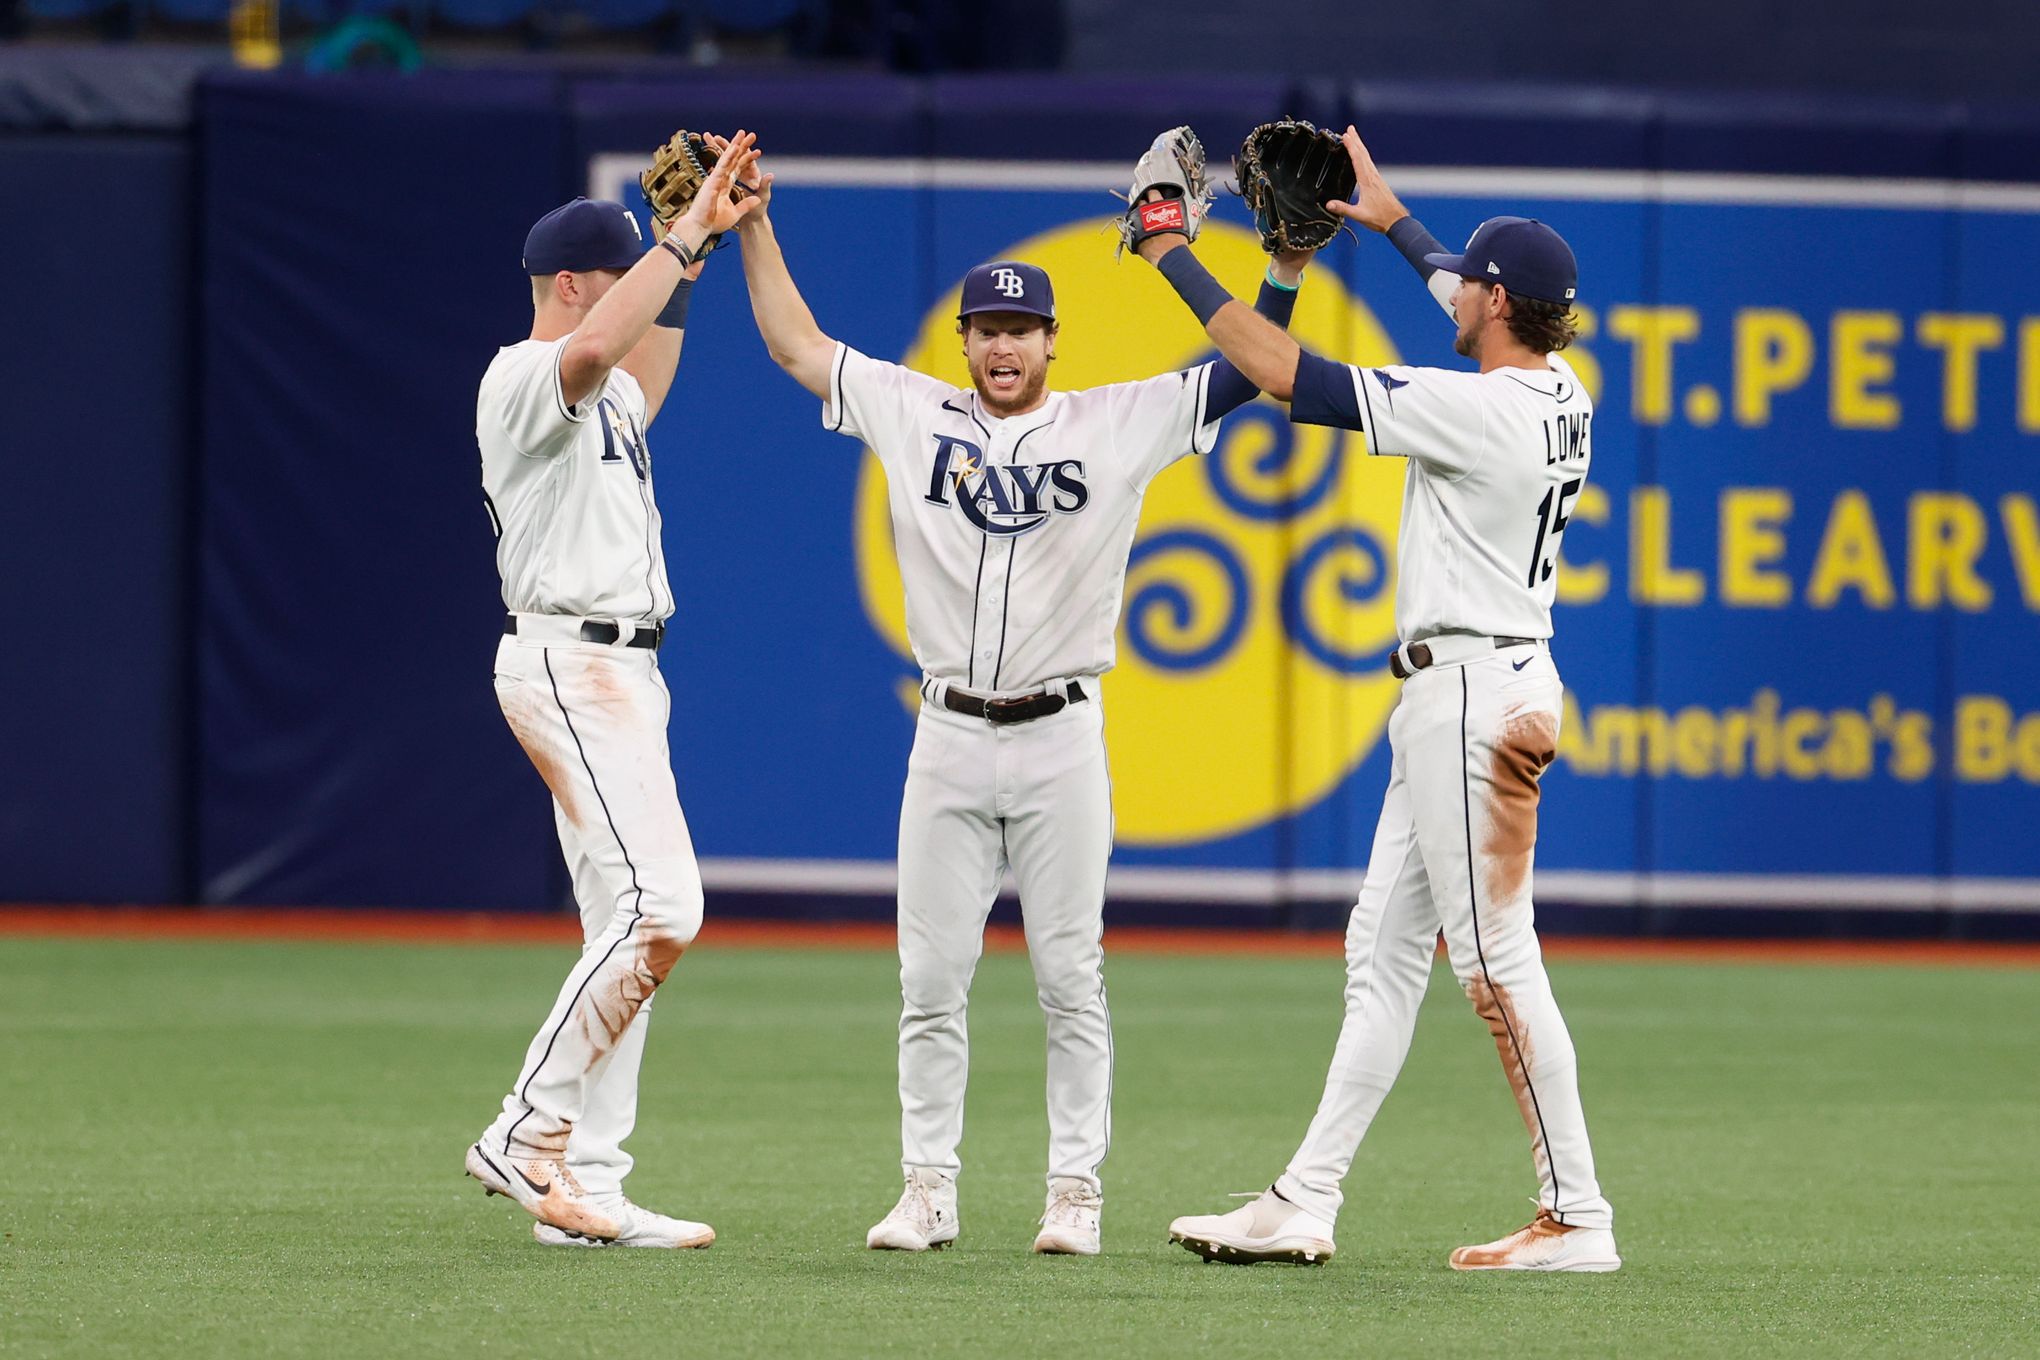 How Brett Phillips, the last man on the Rays' roster, started the